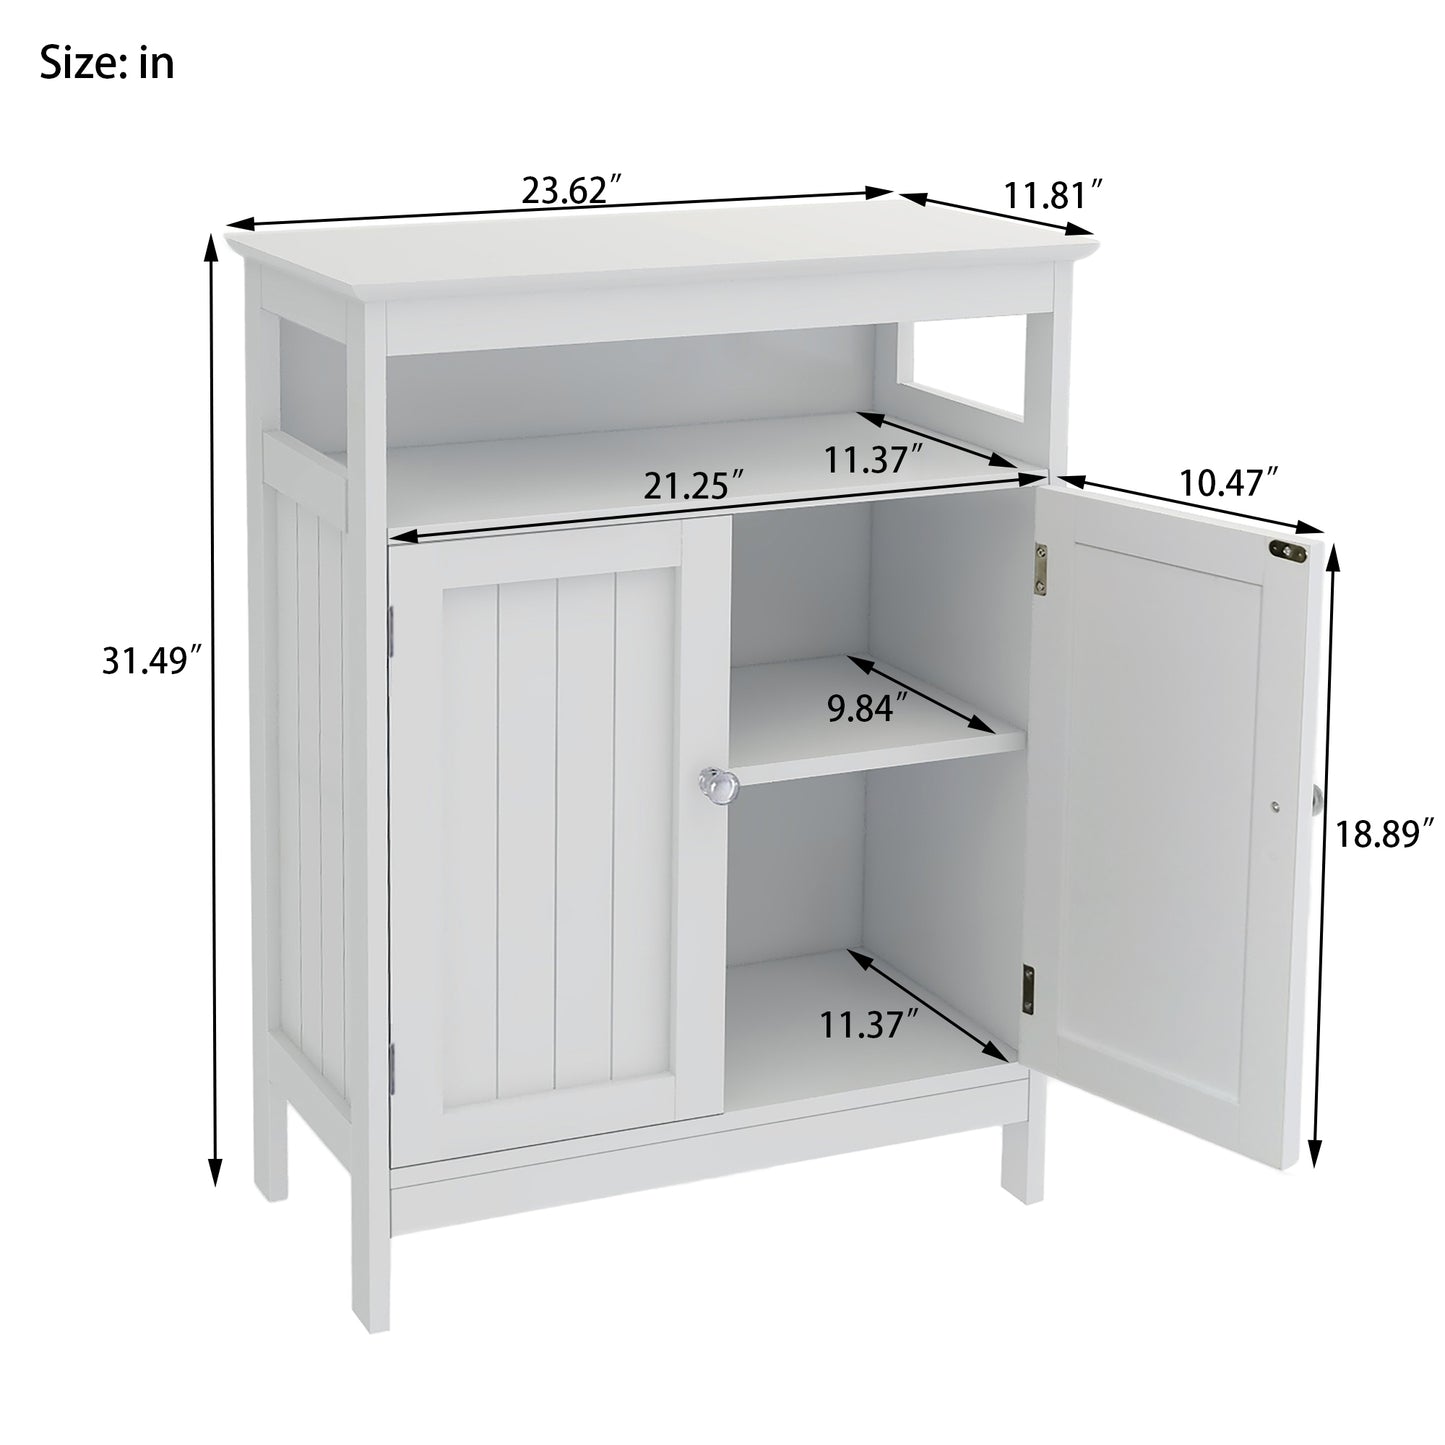 Bathroom standing storage with double shutter doors cabinet-White